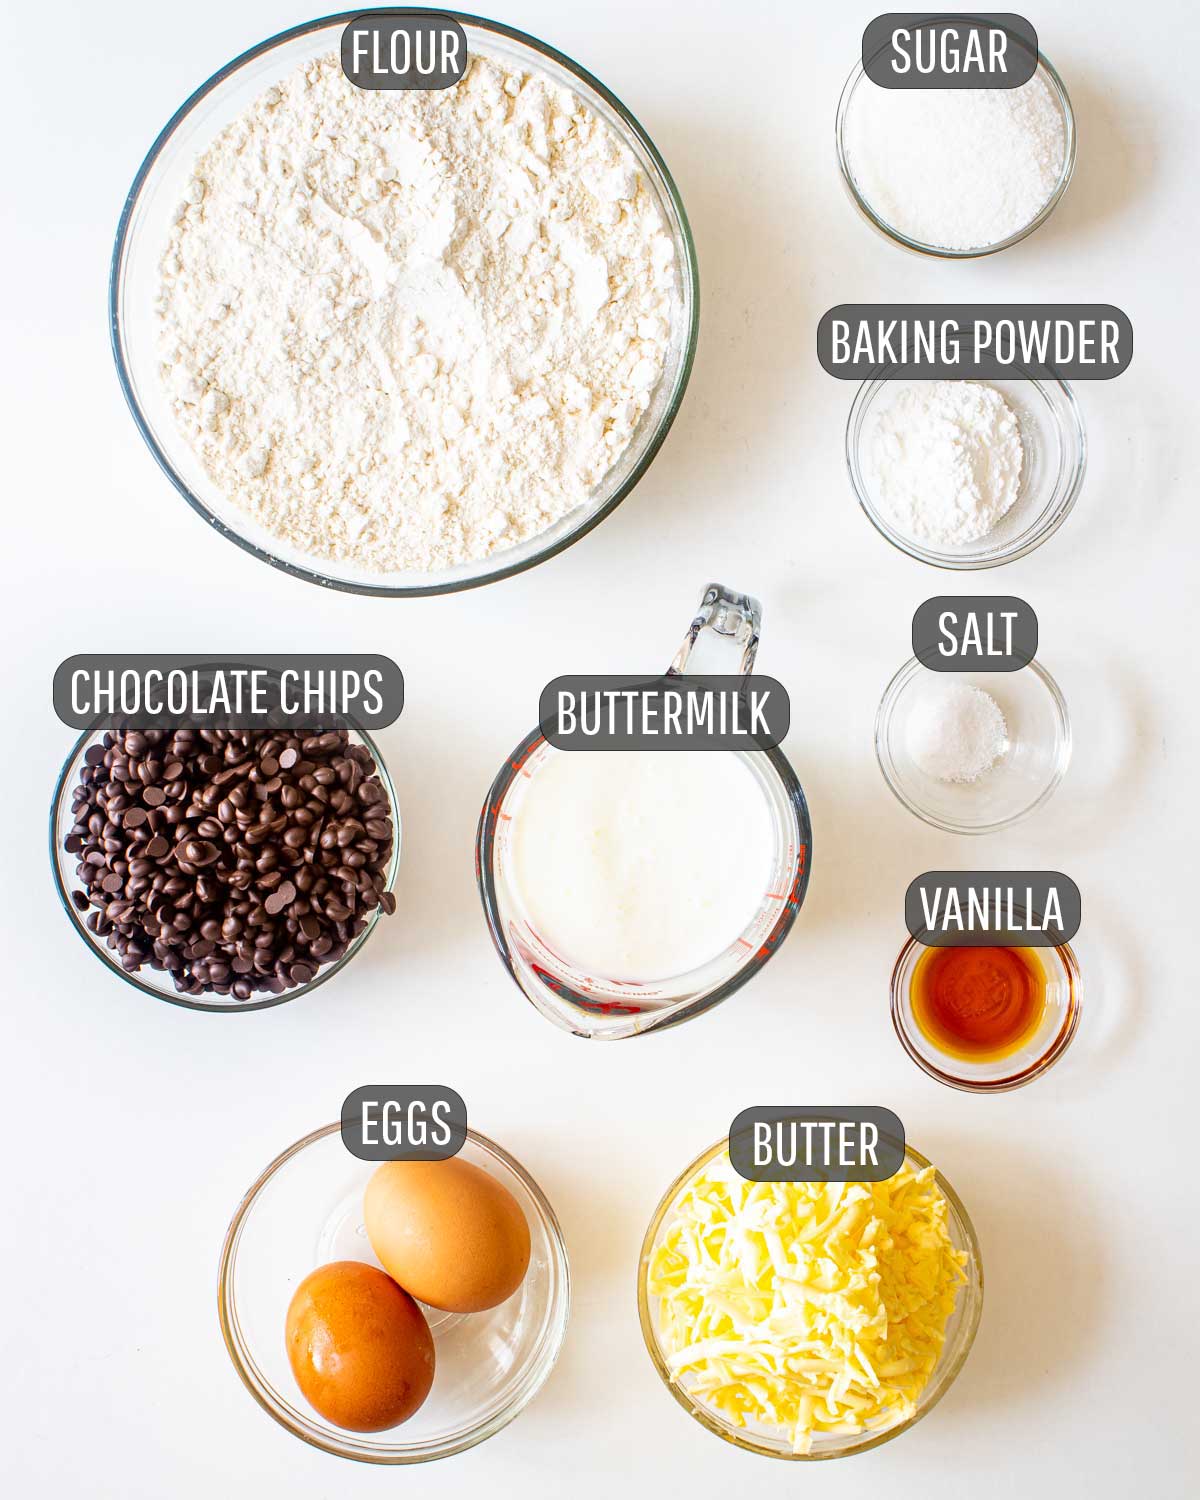 ingredients needed to make chocolate chip scones.